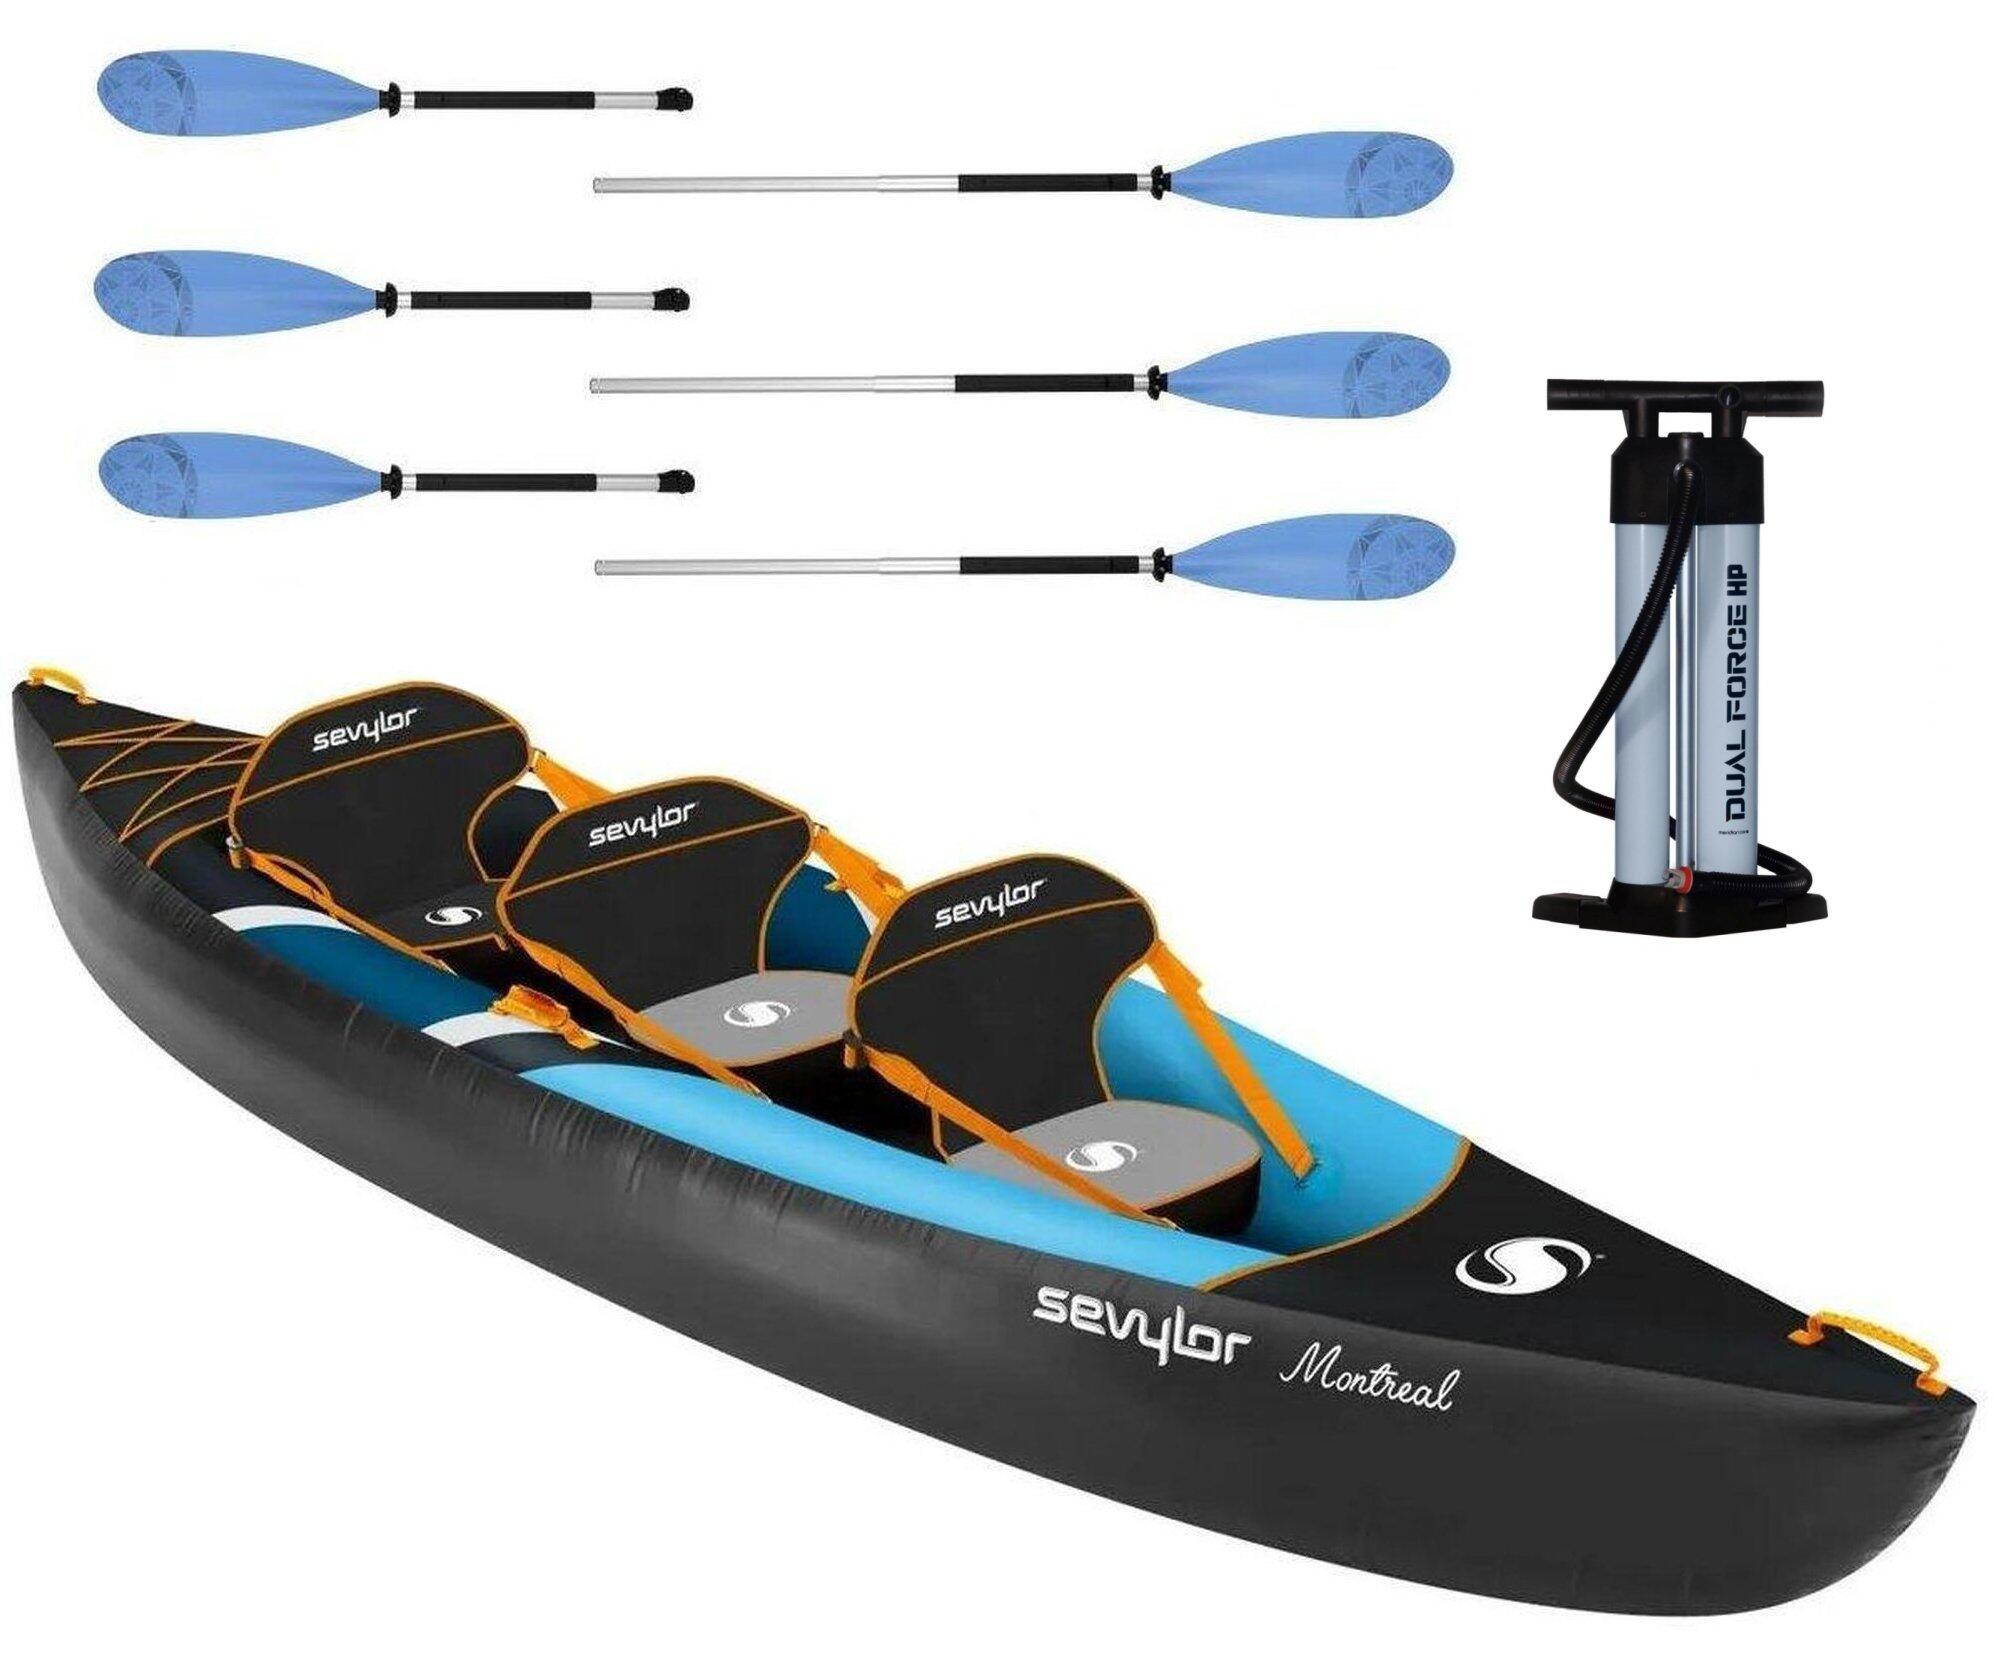 Montreal 3 Person inflatable Kayak kit with Paddles & Pump - Blue / Black 1/7